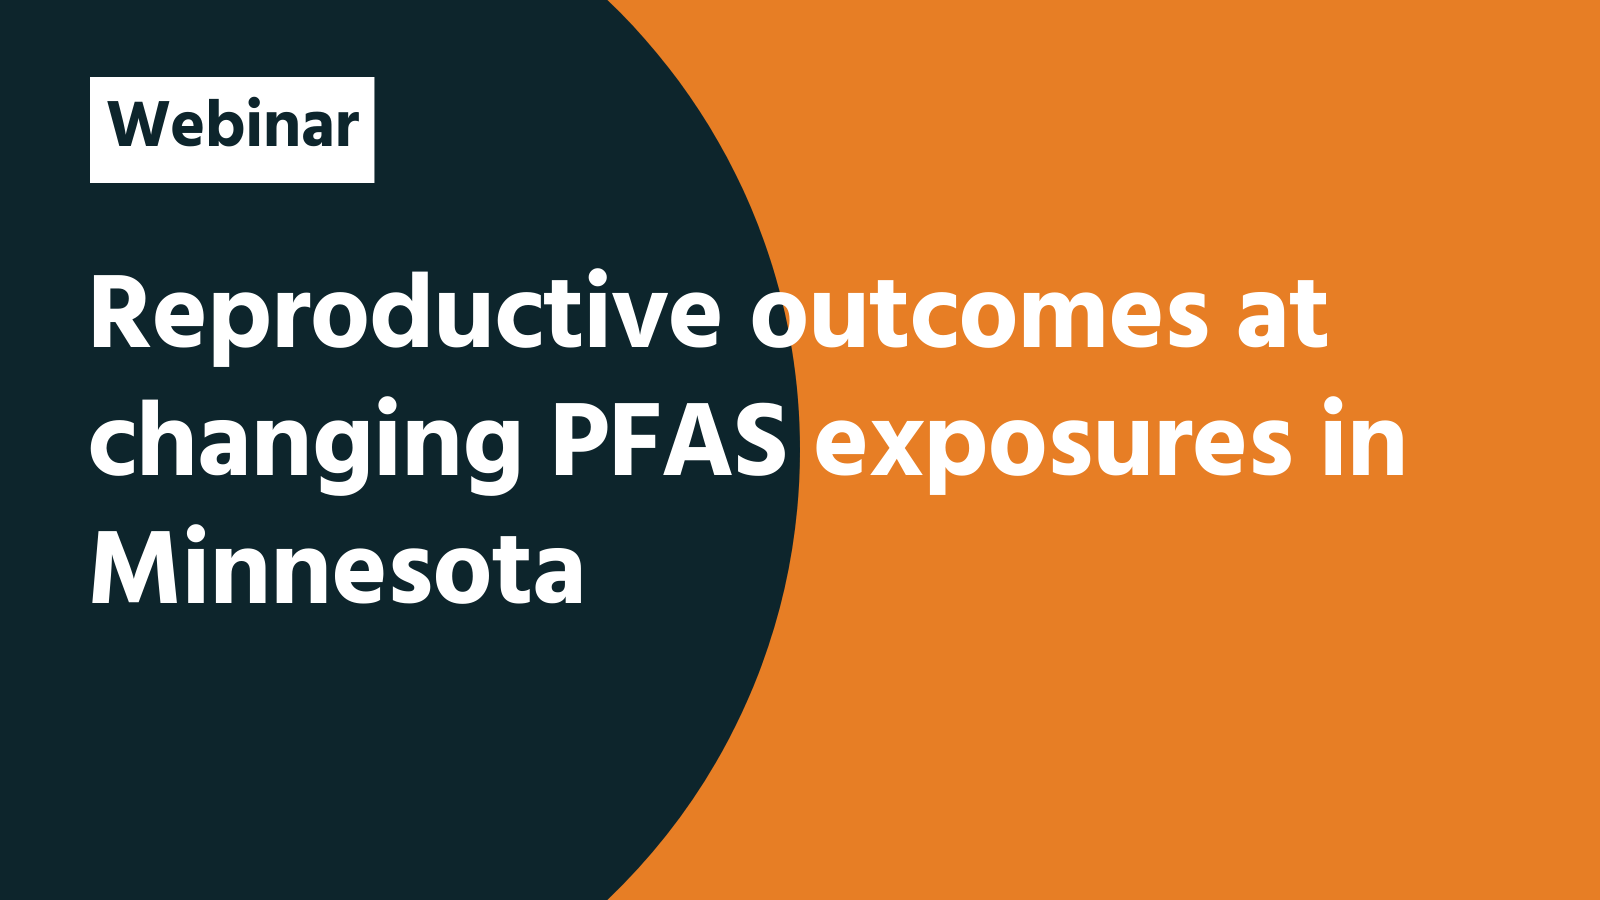 Webinar: Reproductive outcomes at changing PFAS exposures in Minnesota